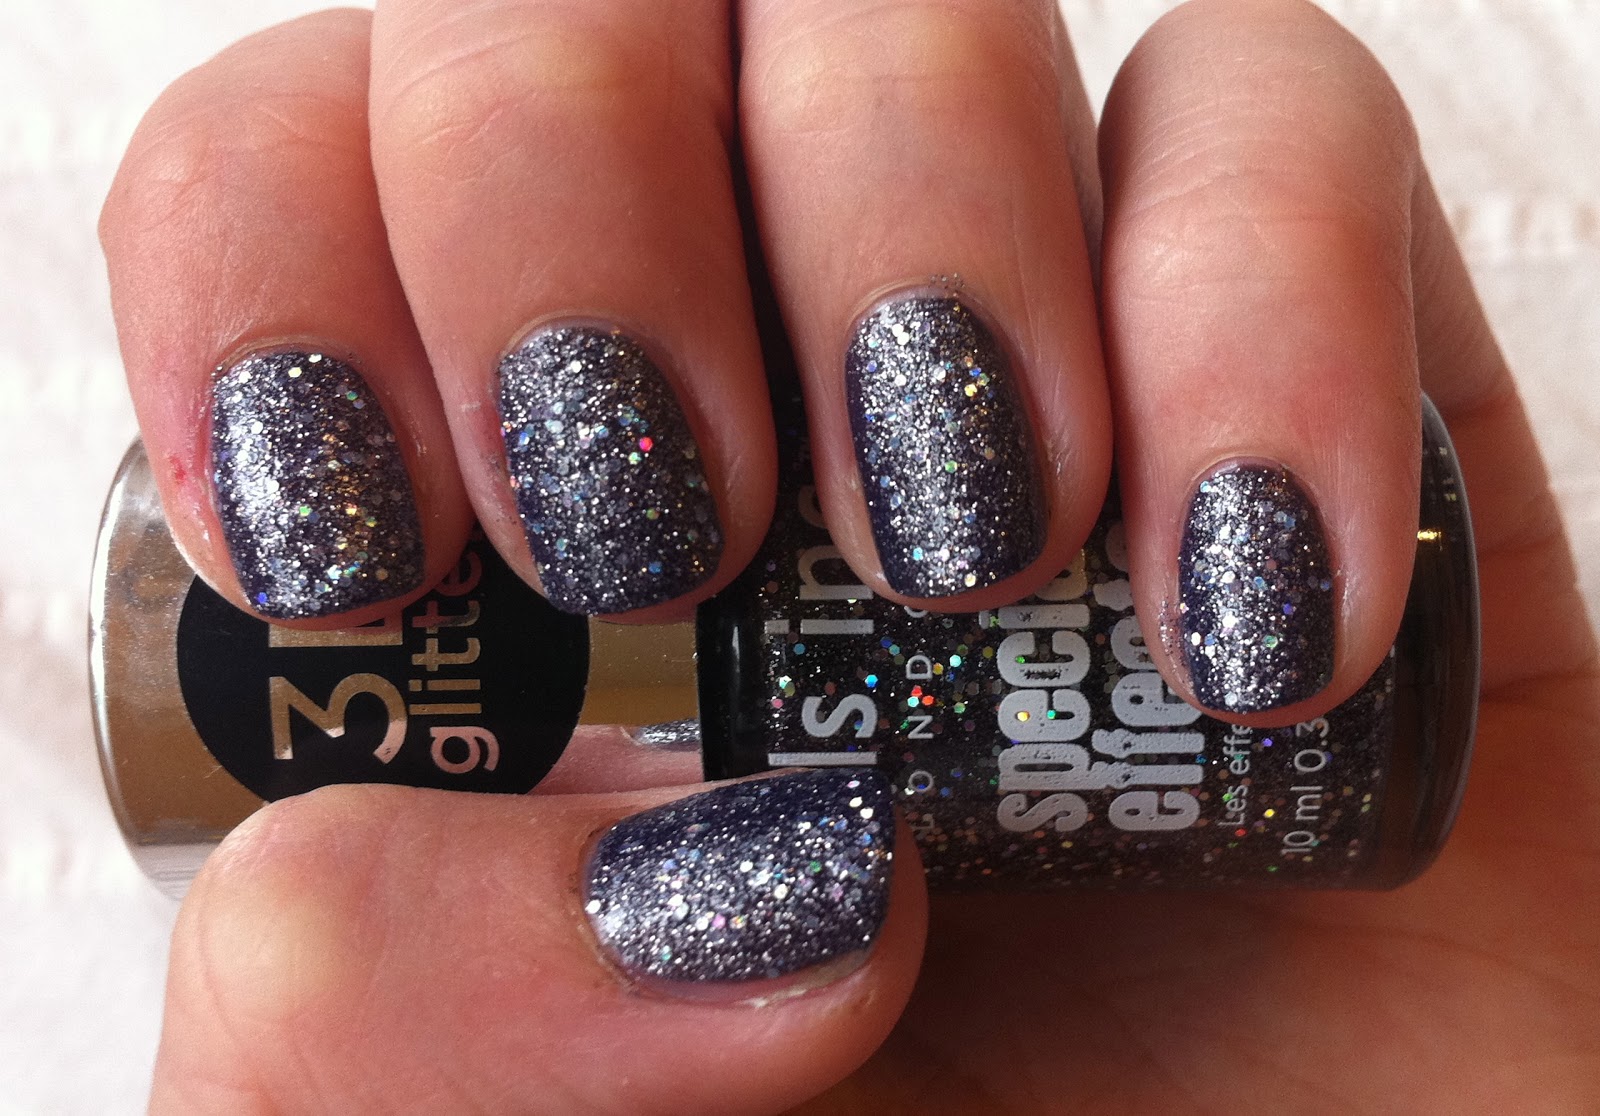 Nails Inc's Special Effects 3D Glitter Nail Polish in Sloane Square